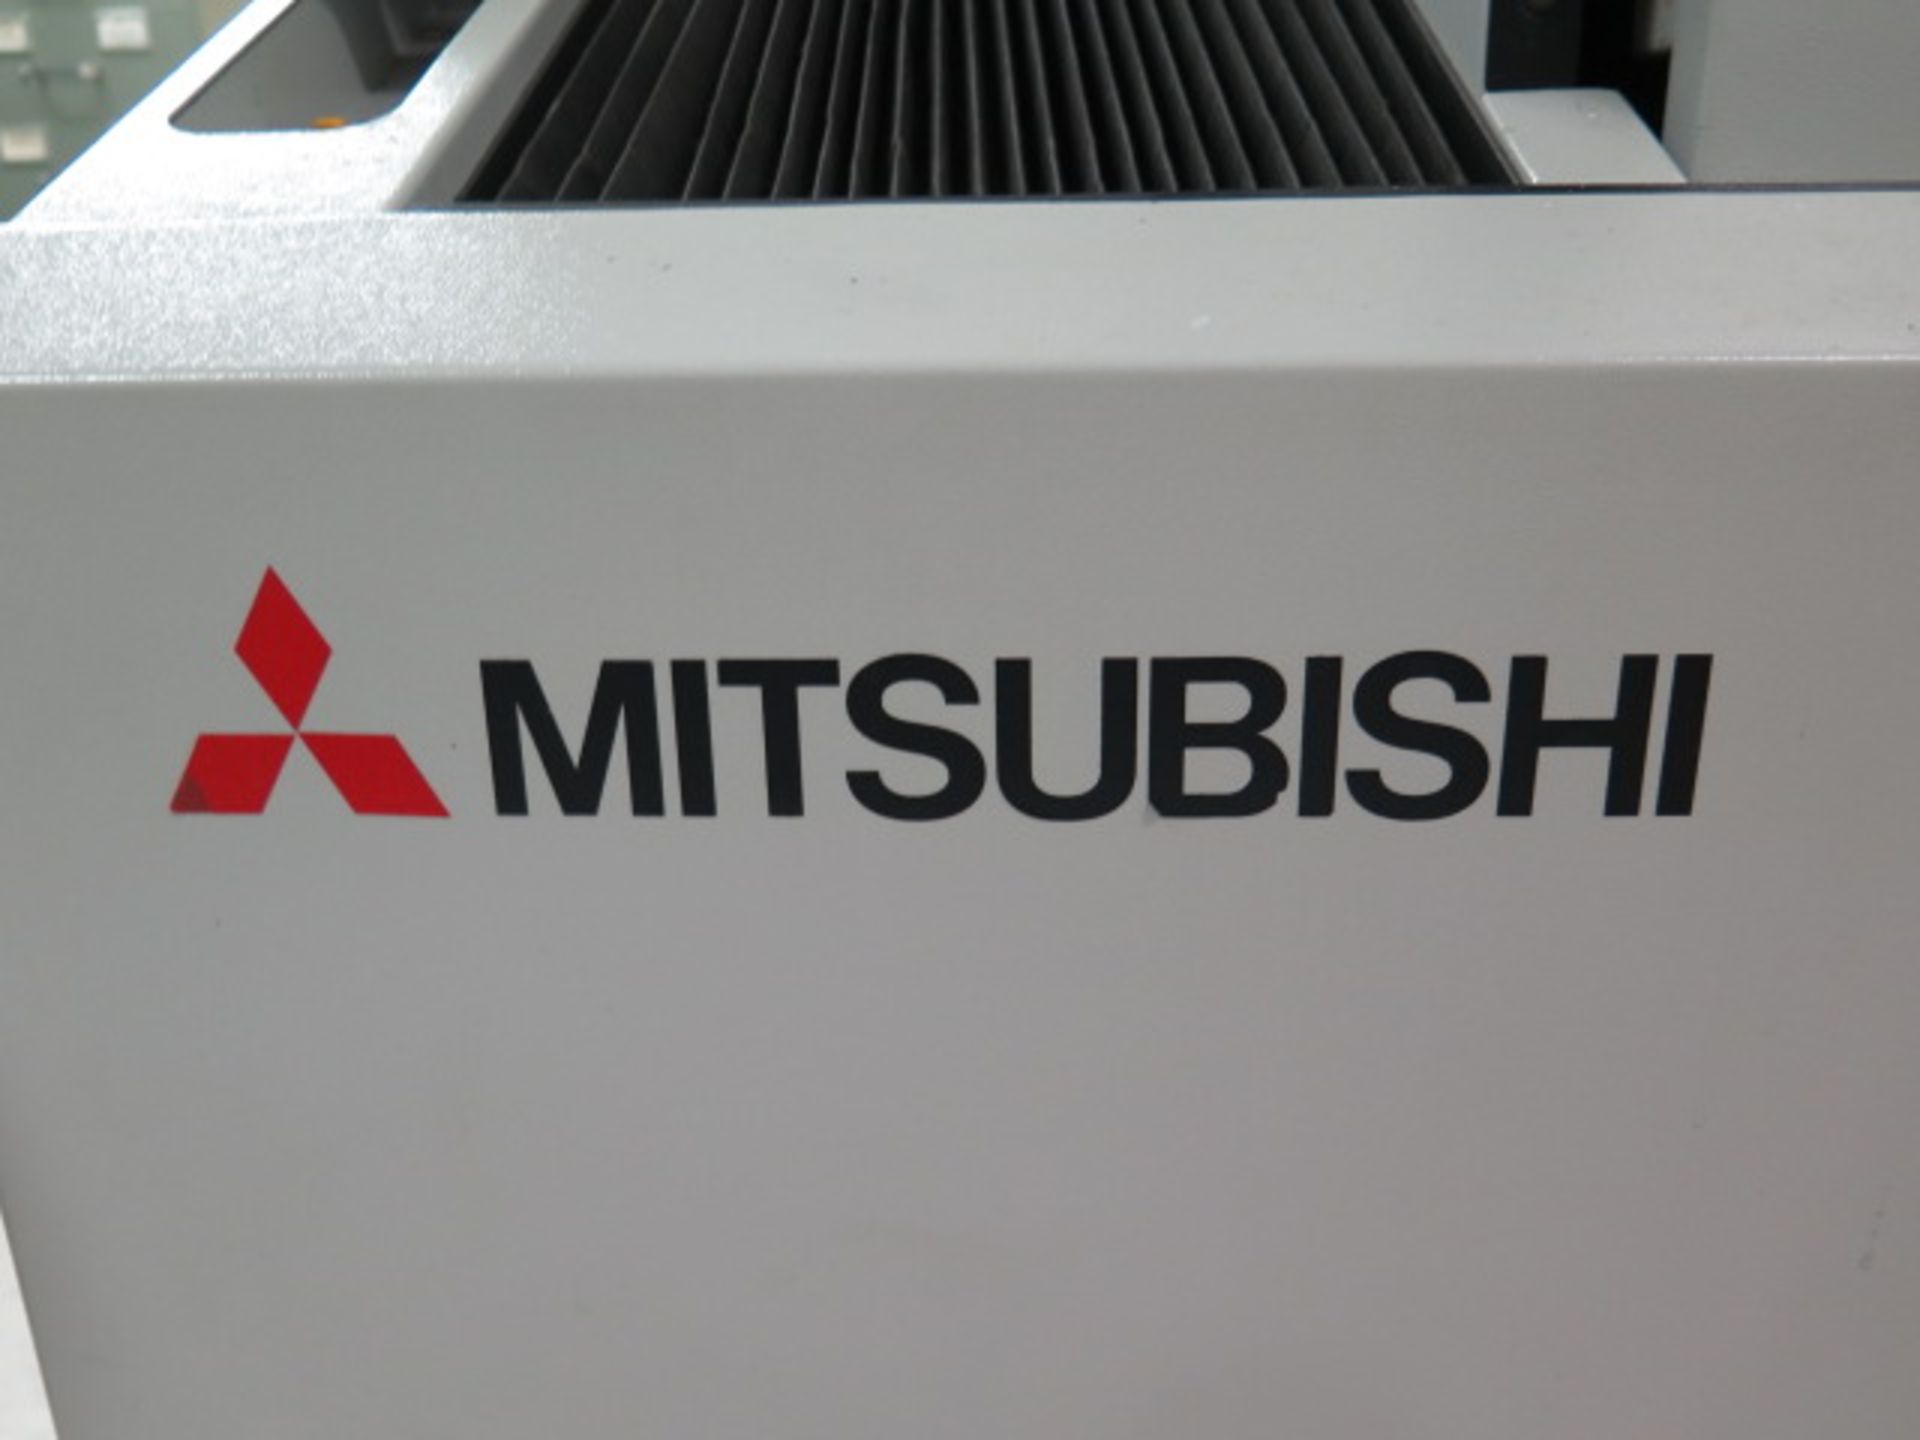 2013 Mitsubishi MD+ PRO III mdl. MV1200S CNC Wire EDM s/n 53DM1687 w/ Mitsubishi M700, SOLD AS IS - Image 22 of 23